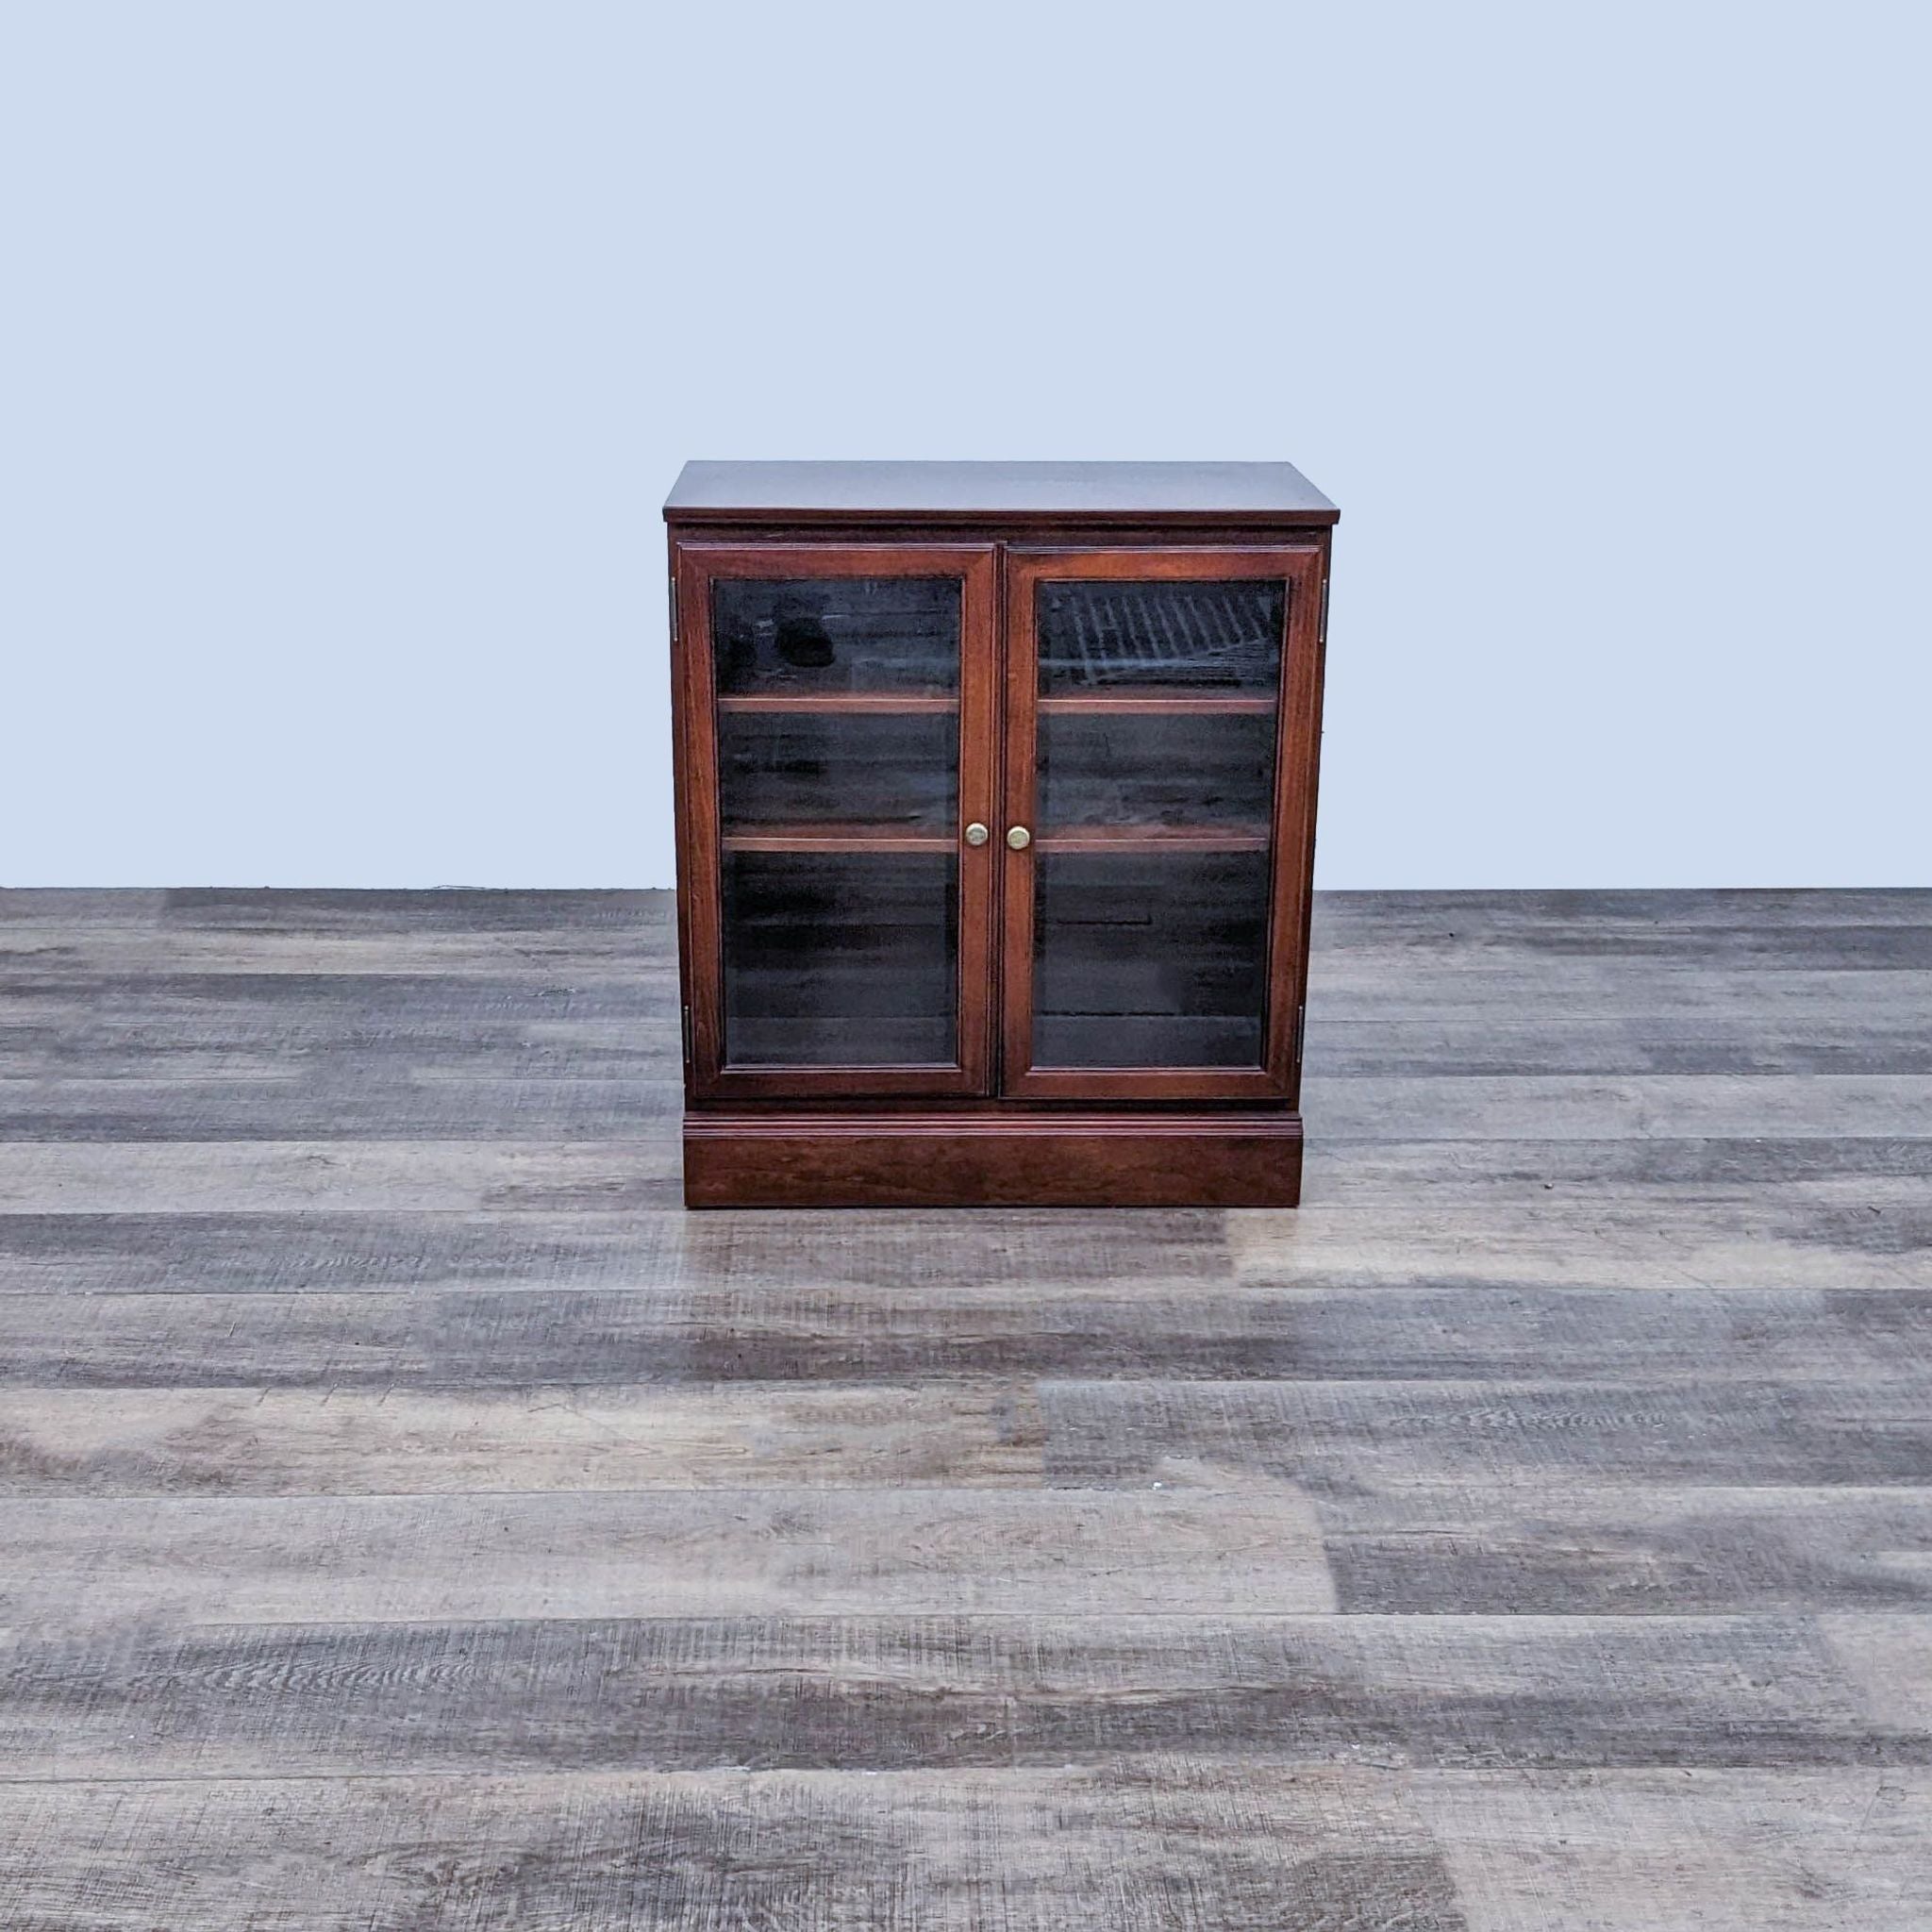 Bombay Company small wooden bookshelf with glass doors and adjustable shelves on a wooden floor.